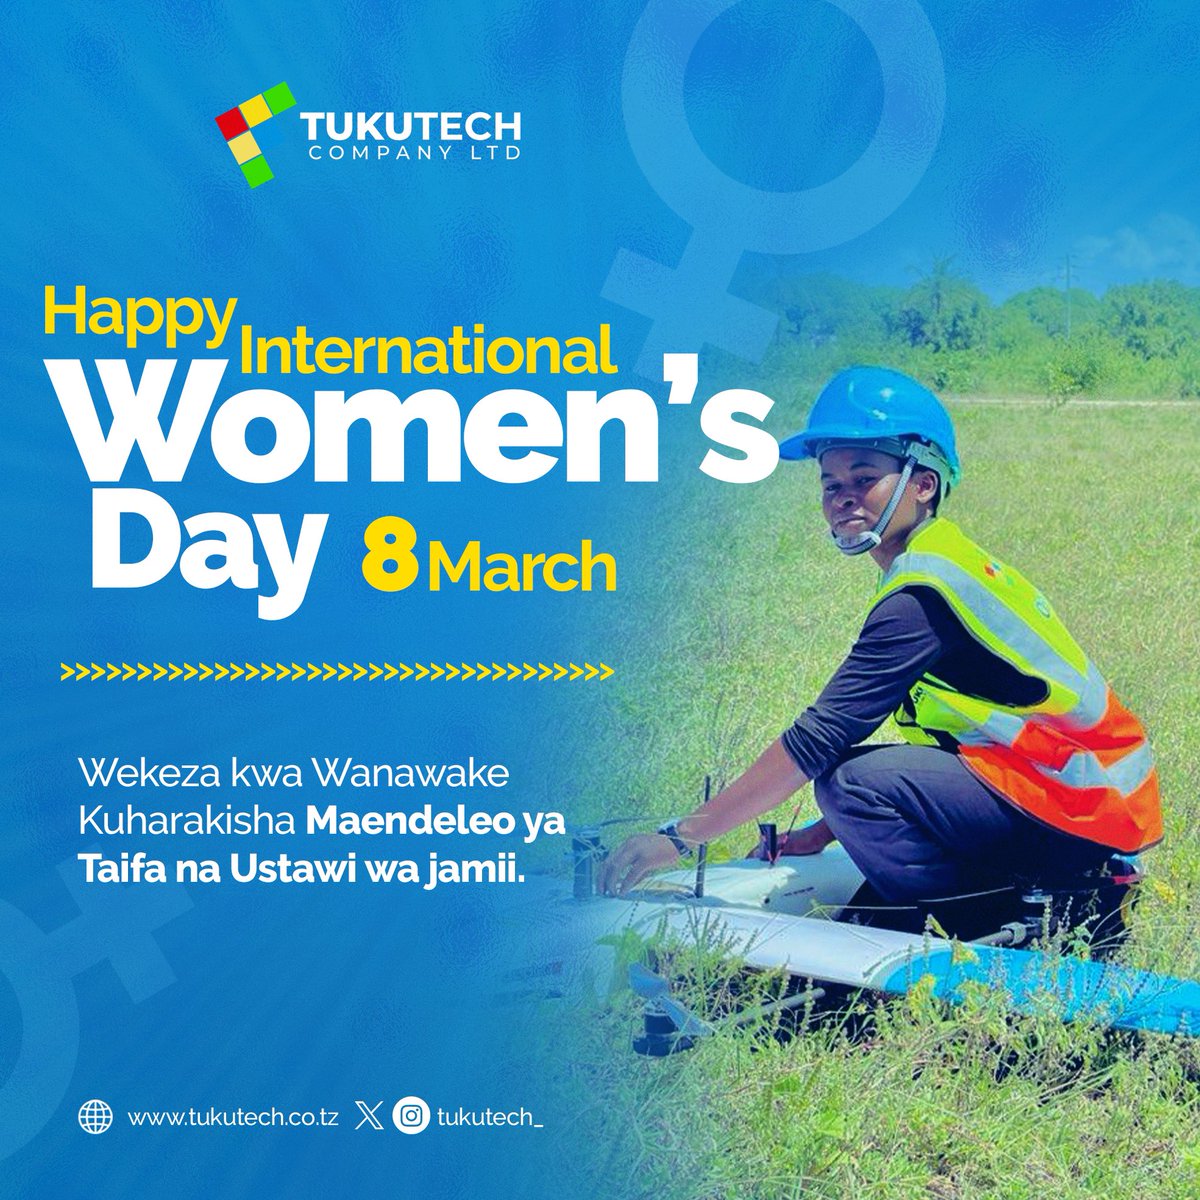 As a woman in the drone technology industry, I believe investing in women is investing in innovation and progress.Cheers to all the women making significant impact in the world of technology #HappyInternationalWomensDay